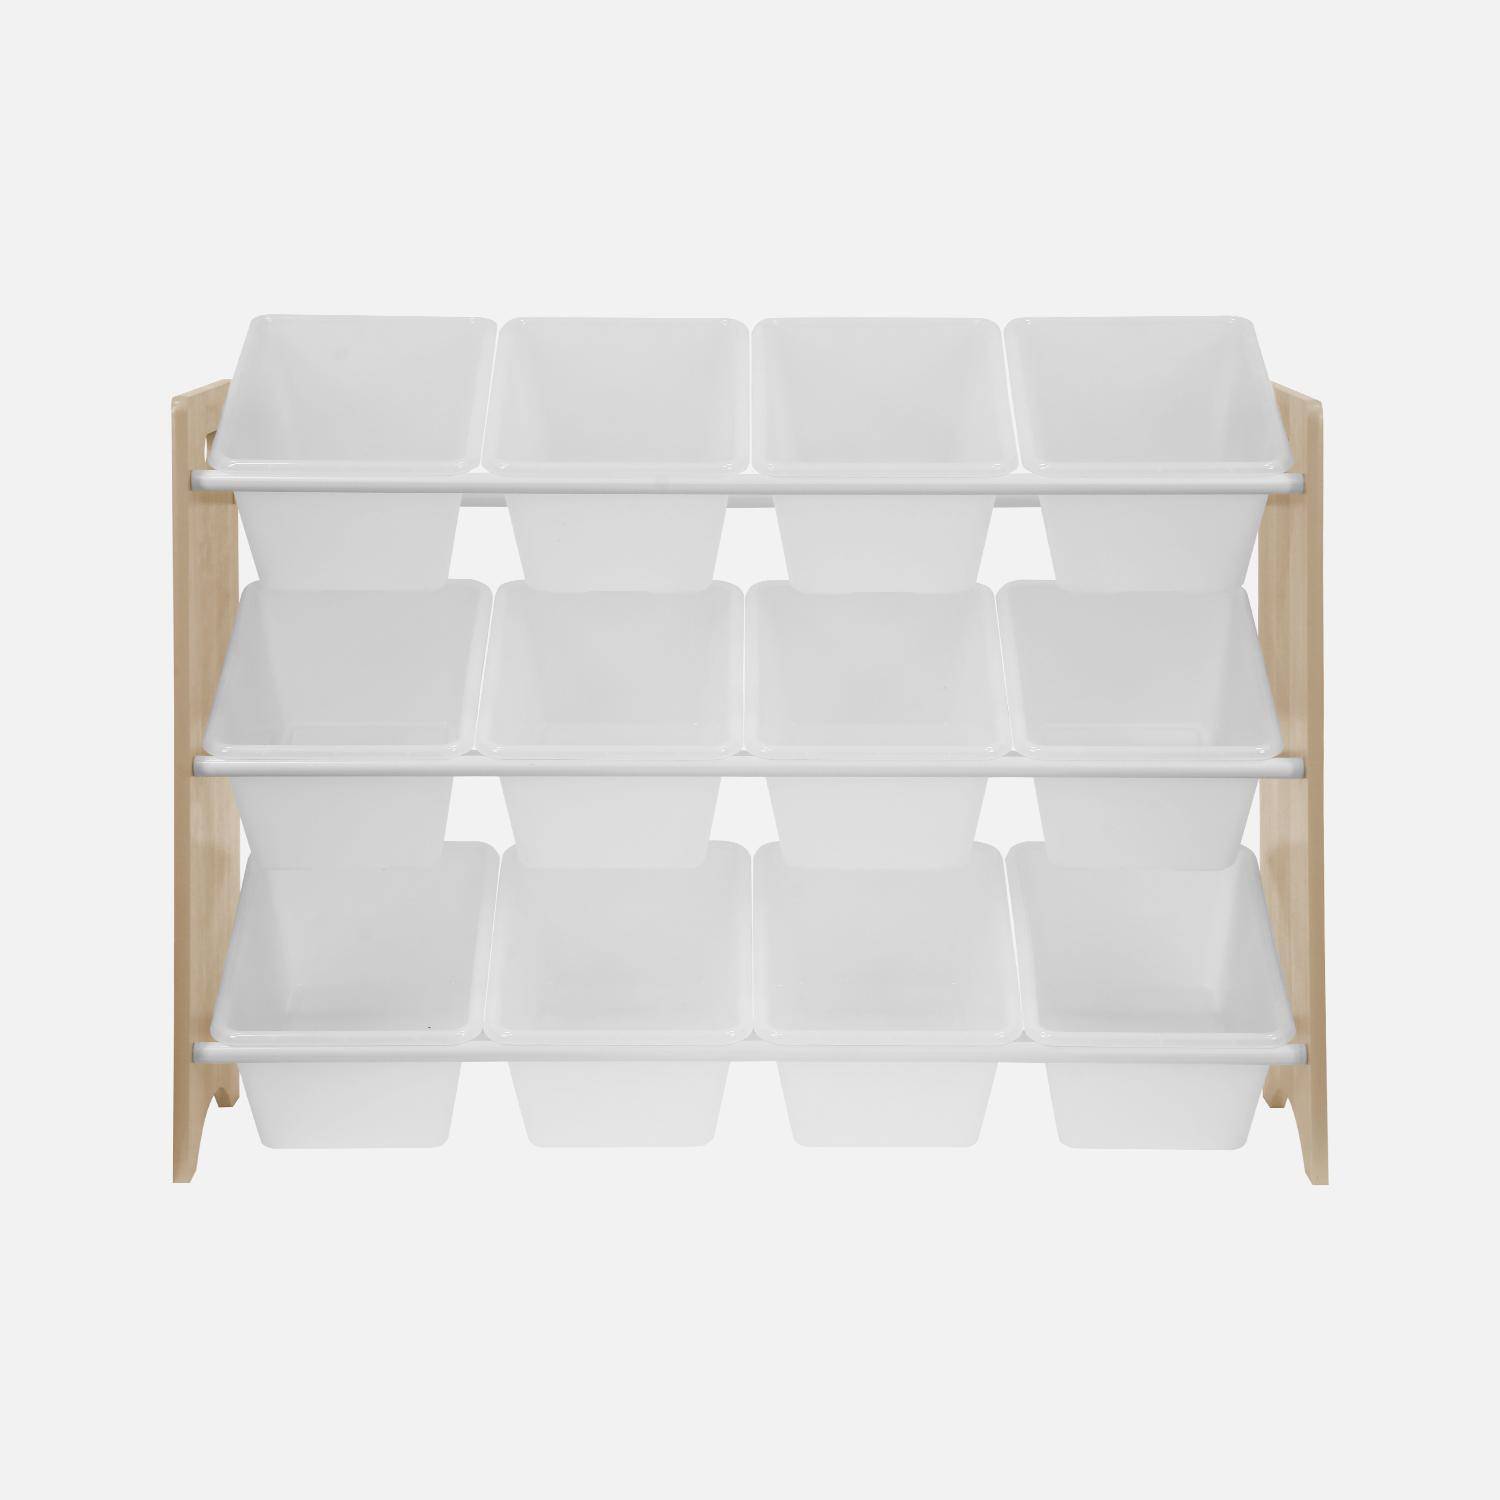 Storage combination with 12 boxes for kids toy, 84x29.5x60cm - Tobias - Natural wood colour Photo4